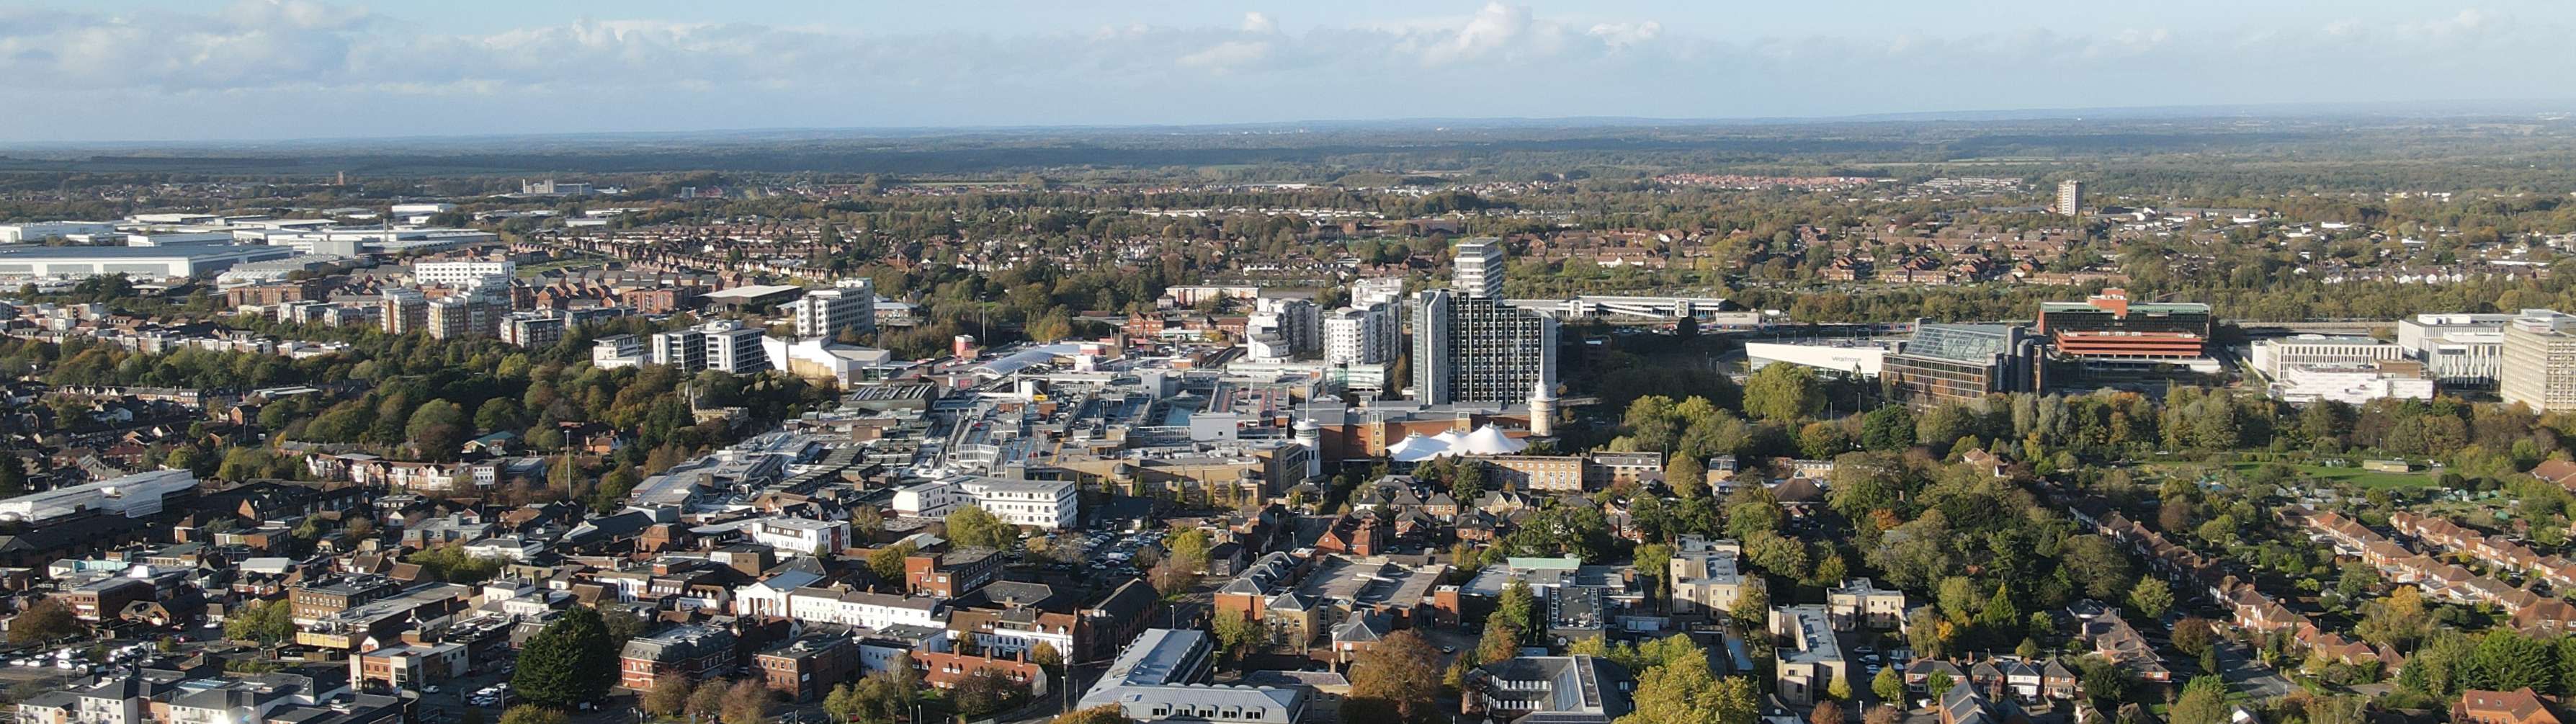 Tall office buildings dominate the skyline of Basingstoke, surrounded by the greenery of parks and trees.